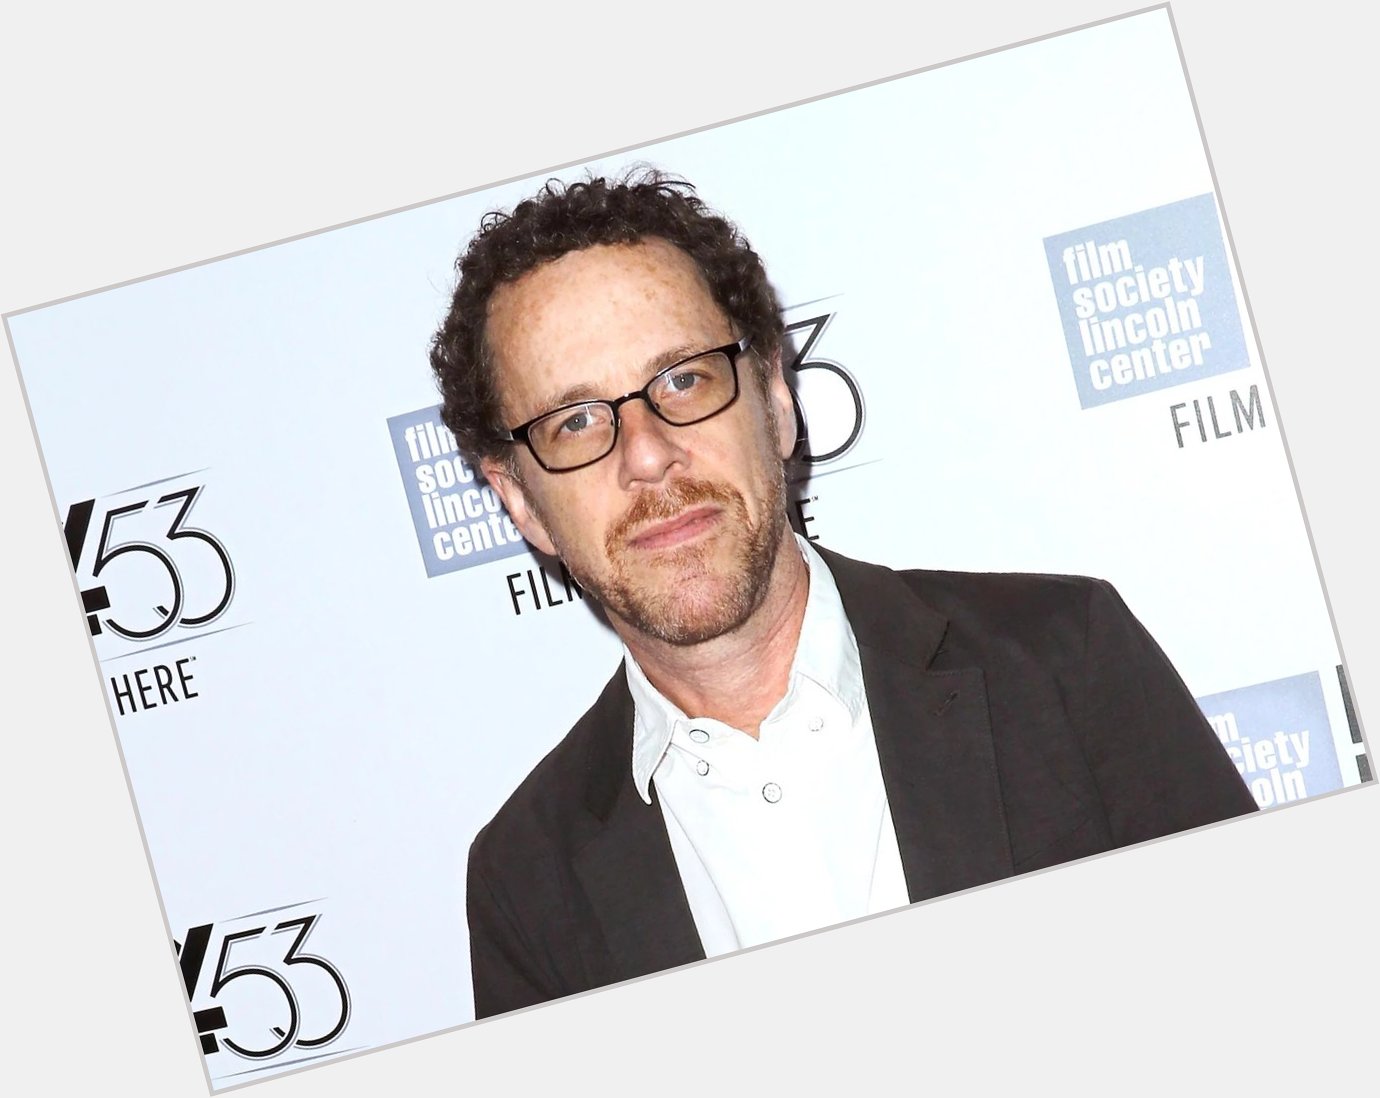 September 21, 2020
Happy birthday to American director Ethan Coen 63 years old. 